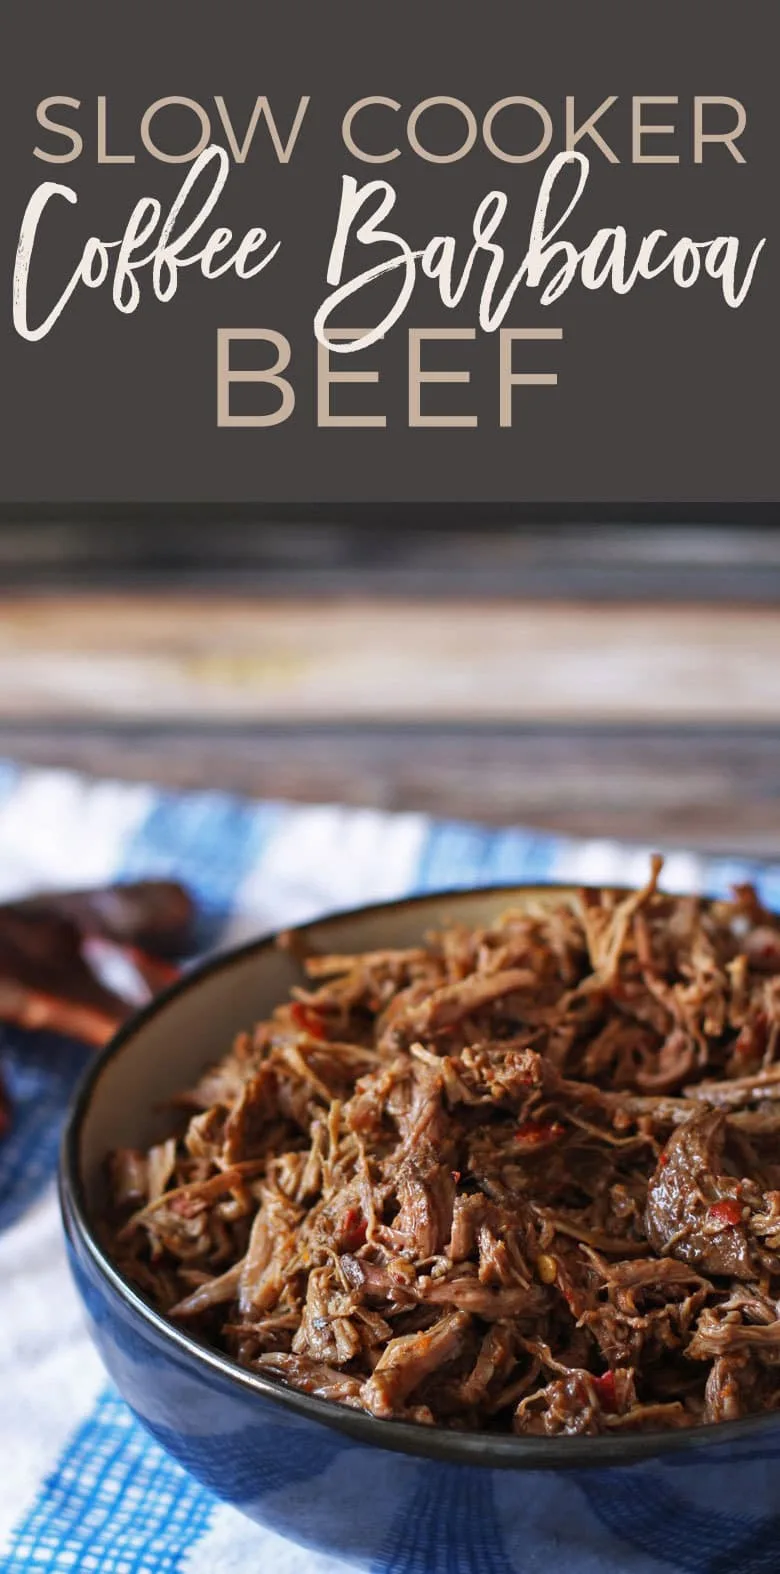 Make this slow cooker coffee barbacoa beef the next time you are in the mood for tacos, burritos or quesadillas! If you’re looking for game day recipes, this is the perfect dinner! | honeyandbirch.com